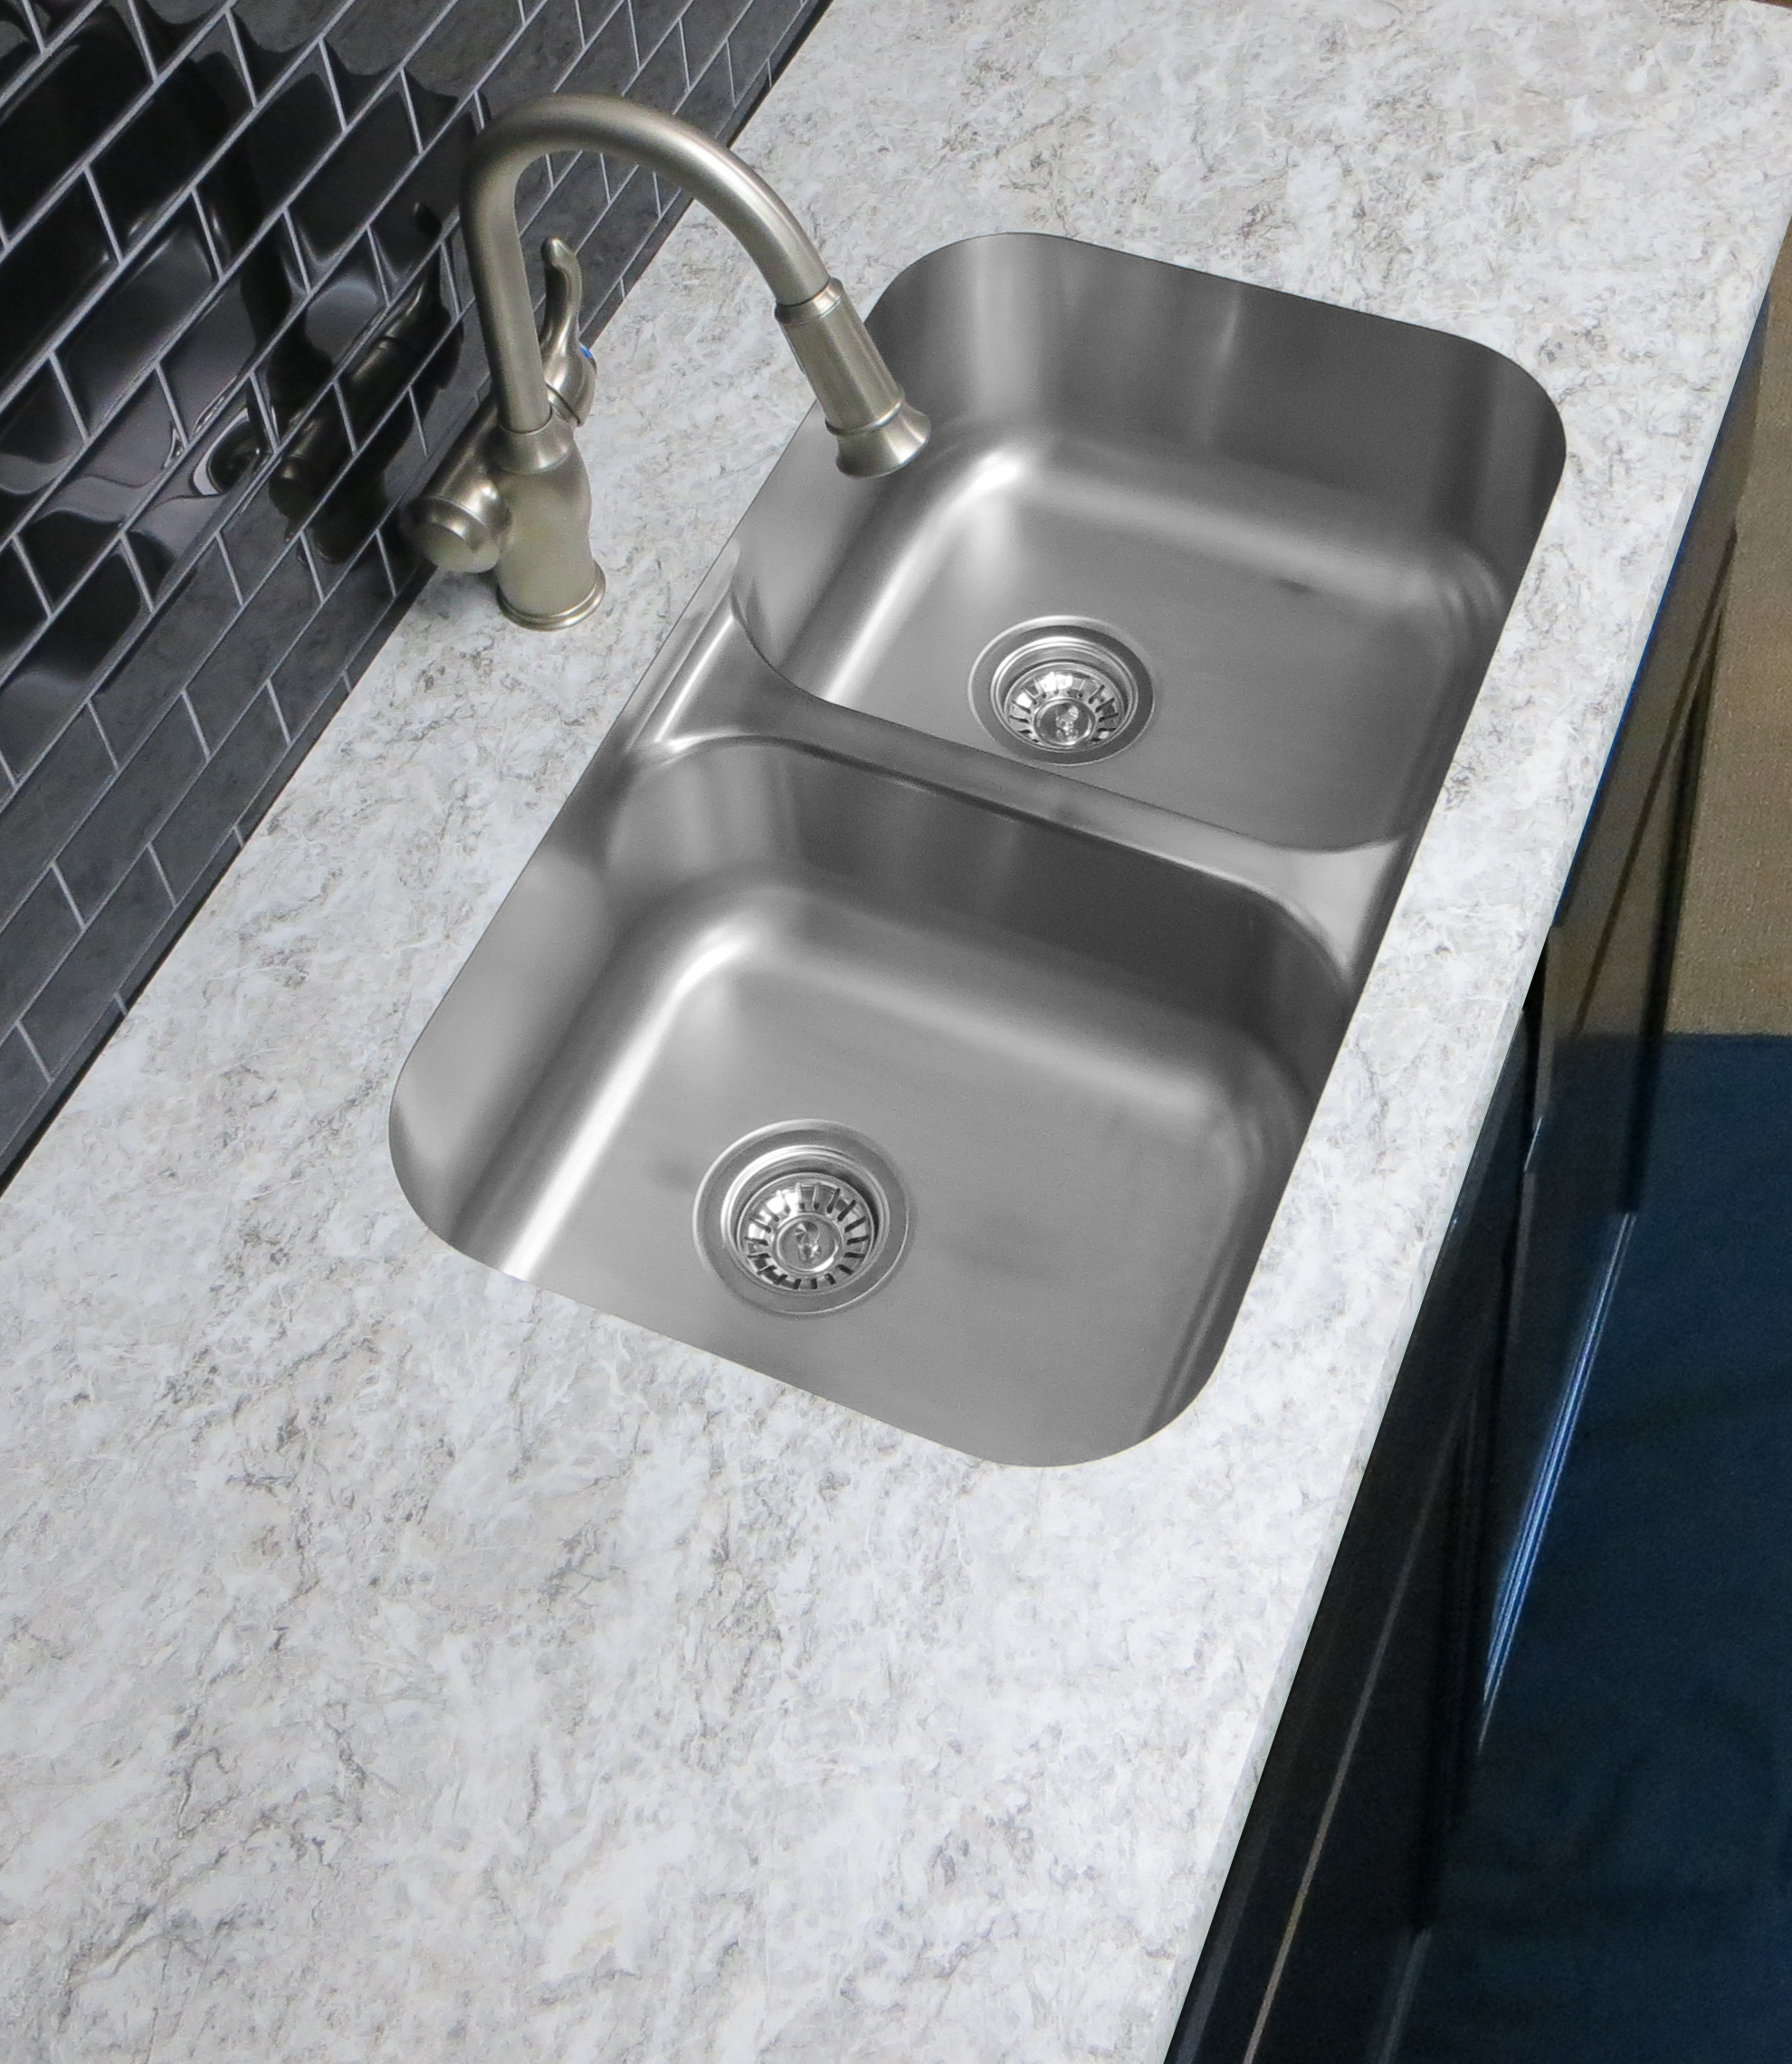 Monarch Countertops Cabinets Ltd, Can You Have An Undermount Sink With Laminate Countertops